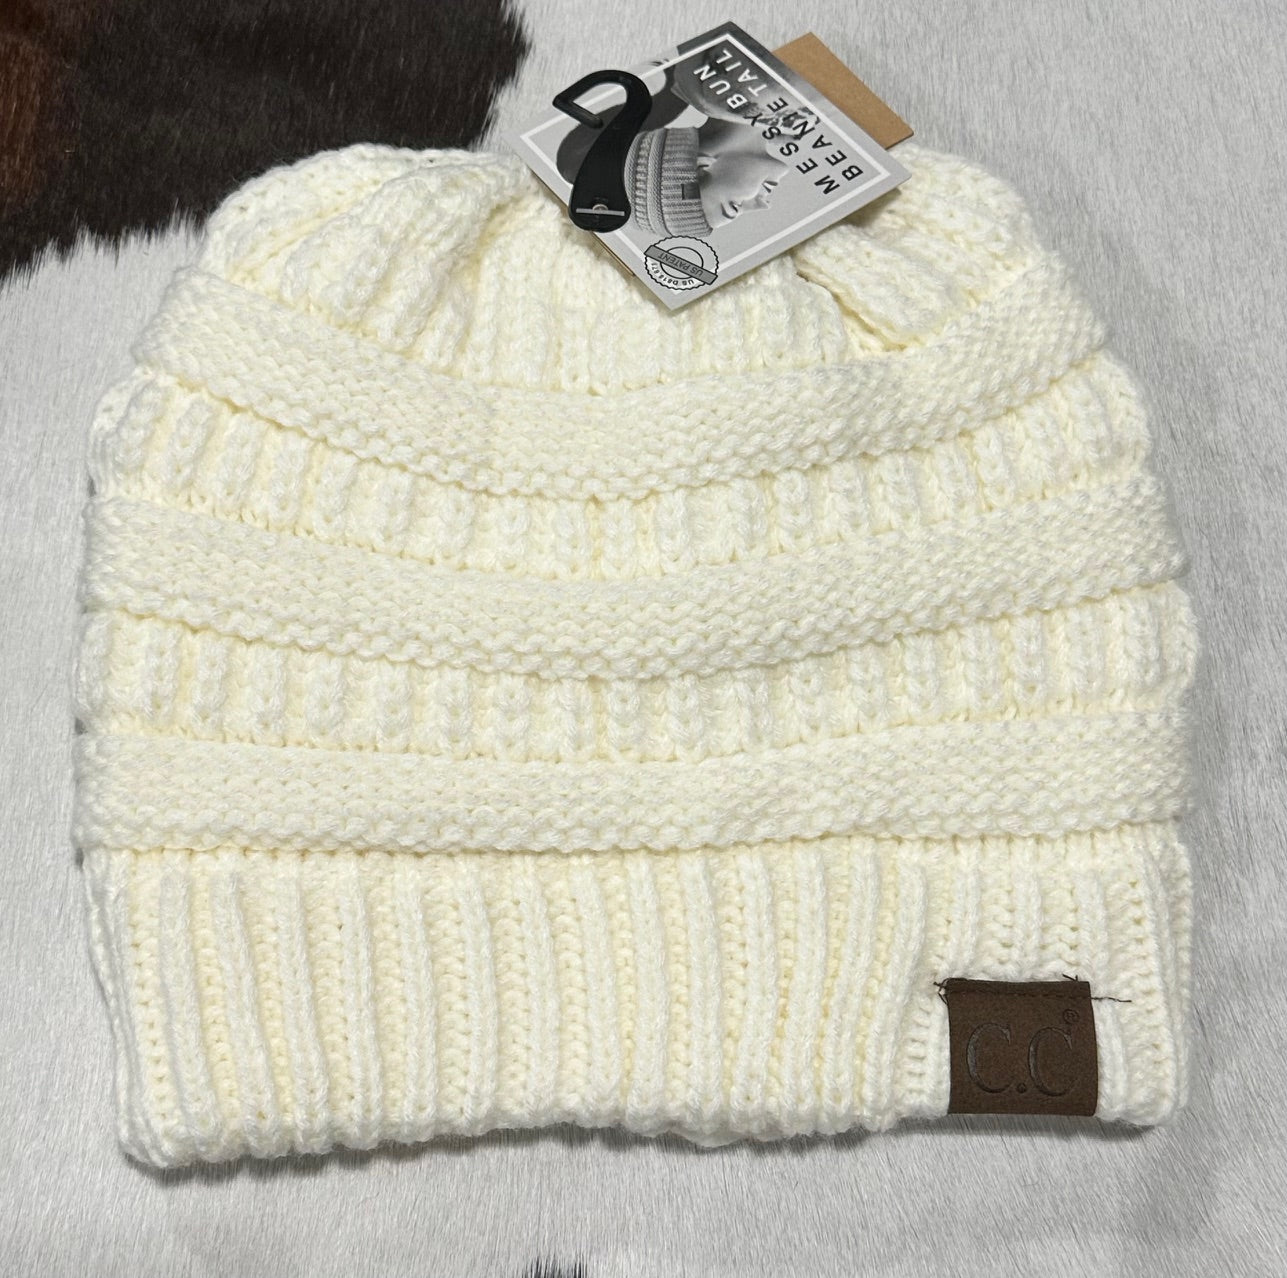 Fuzzy Lined Solid Classic CC Beanie Tail